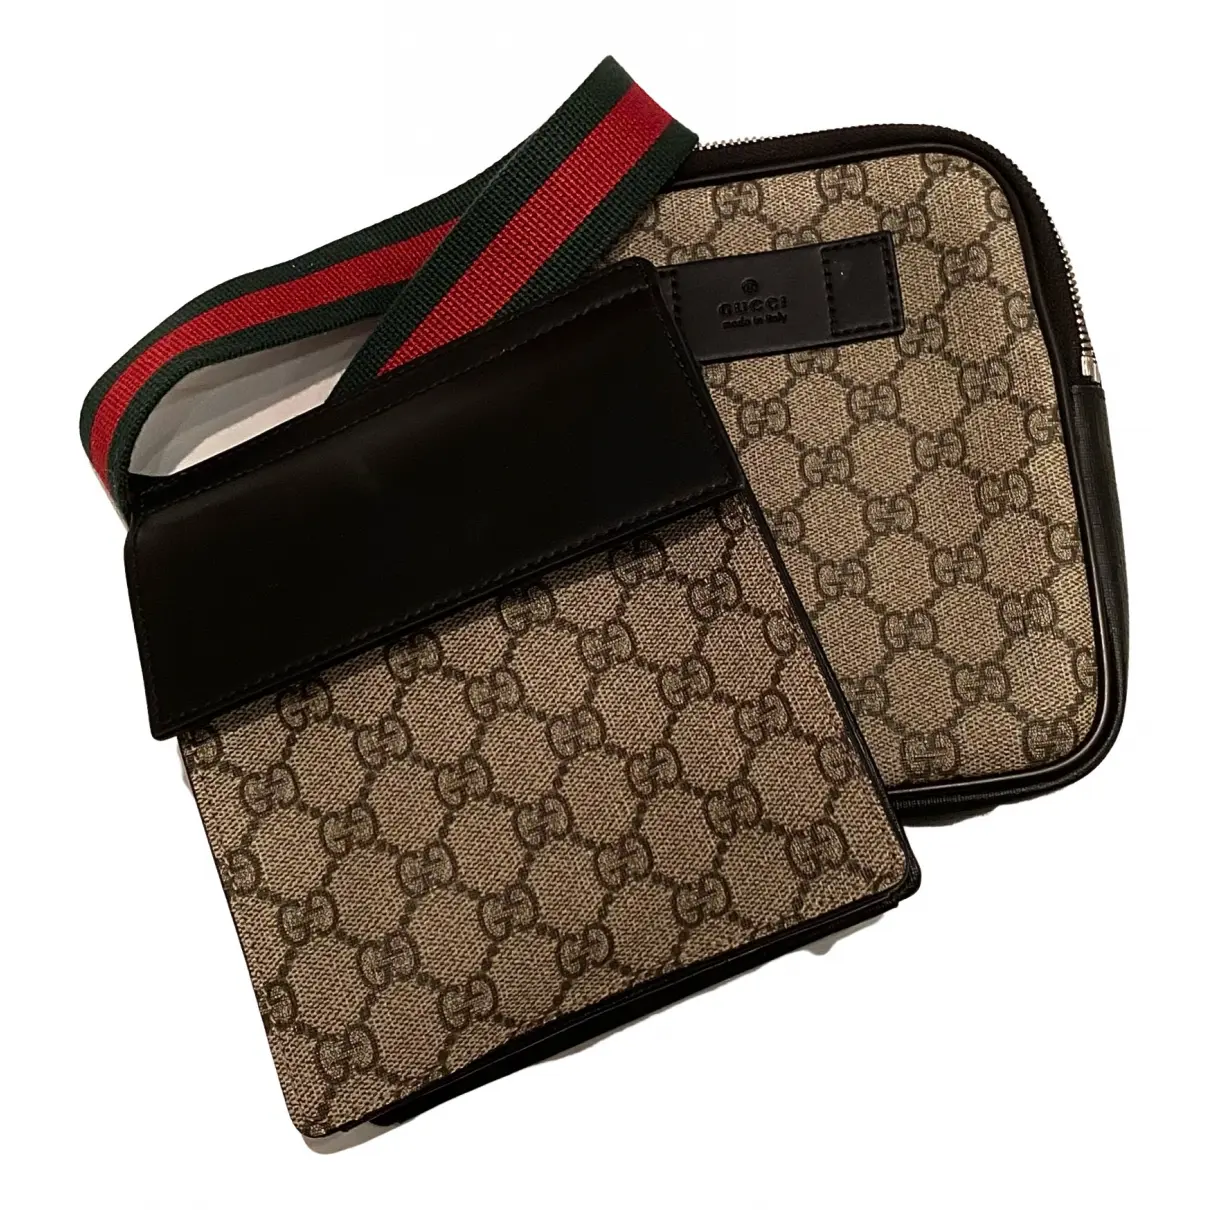 Neo Vintage exotic leathers crossbody bag Gucci